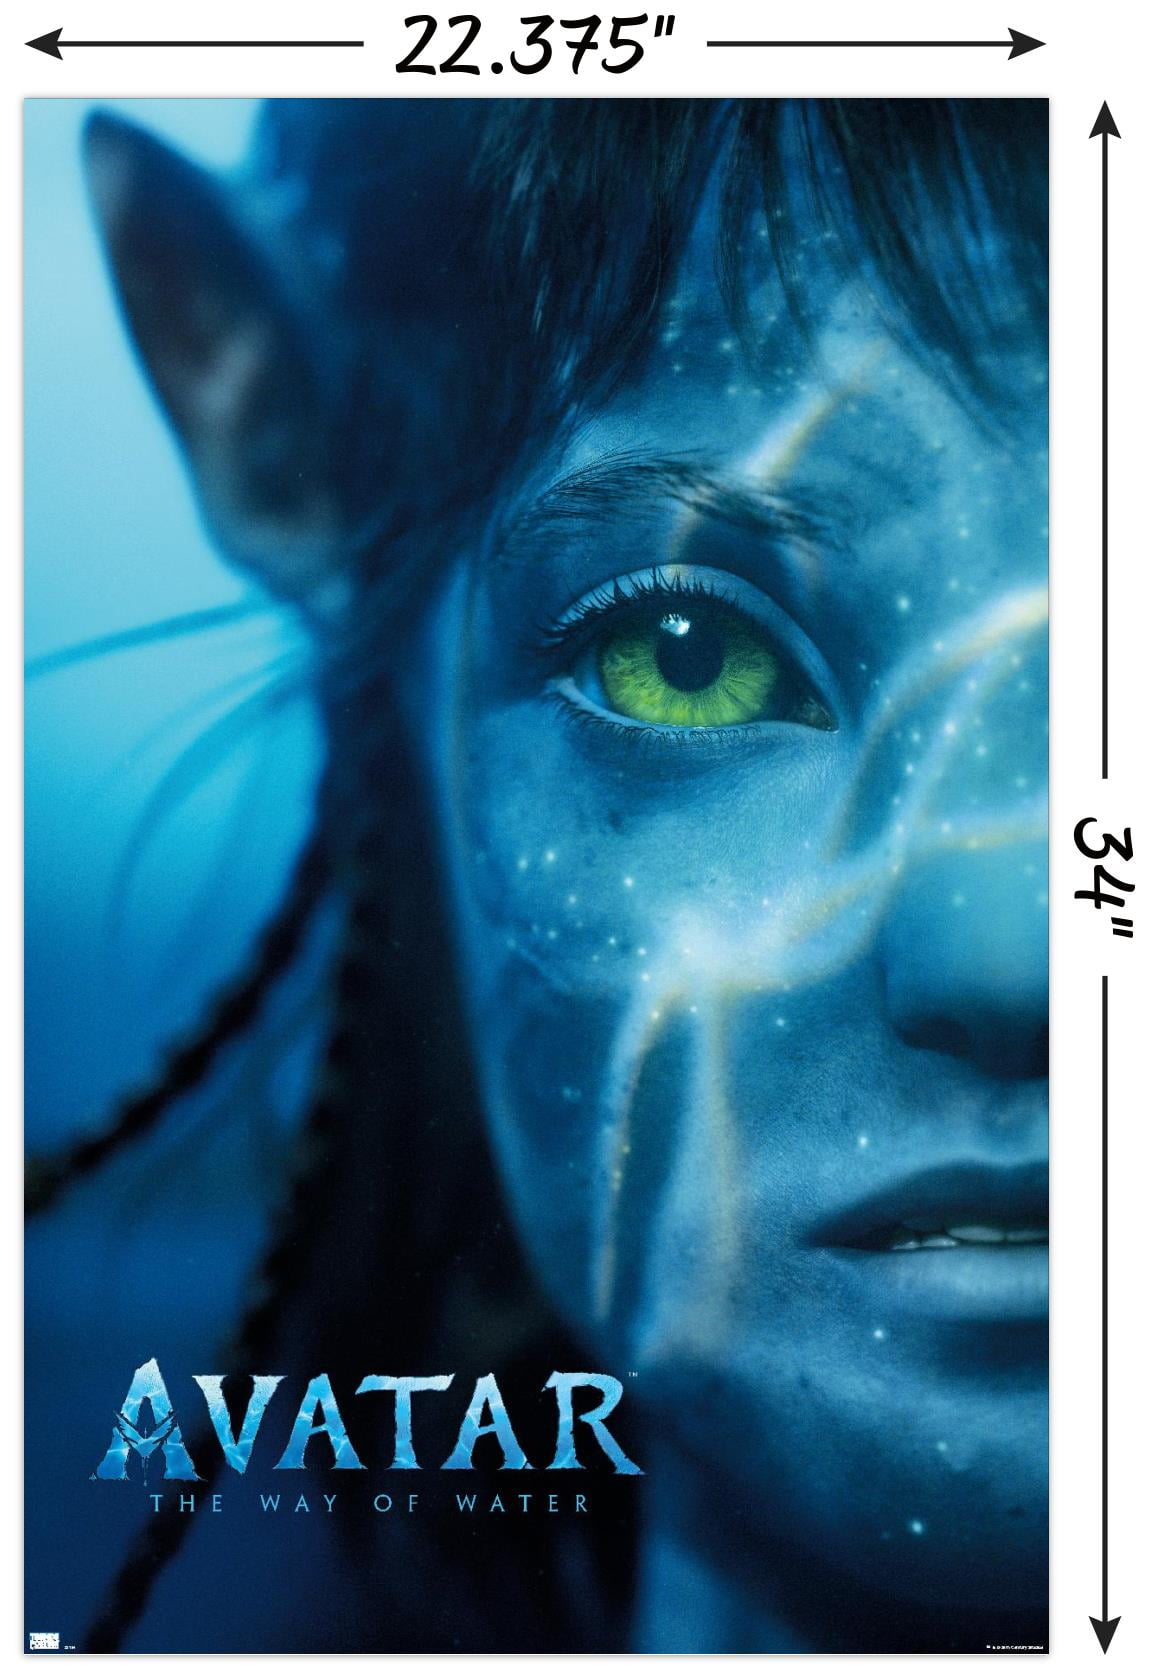 AVATAR French Movie Poster  15x21 in  2009